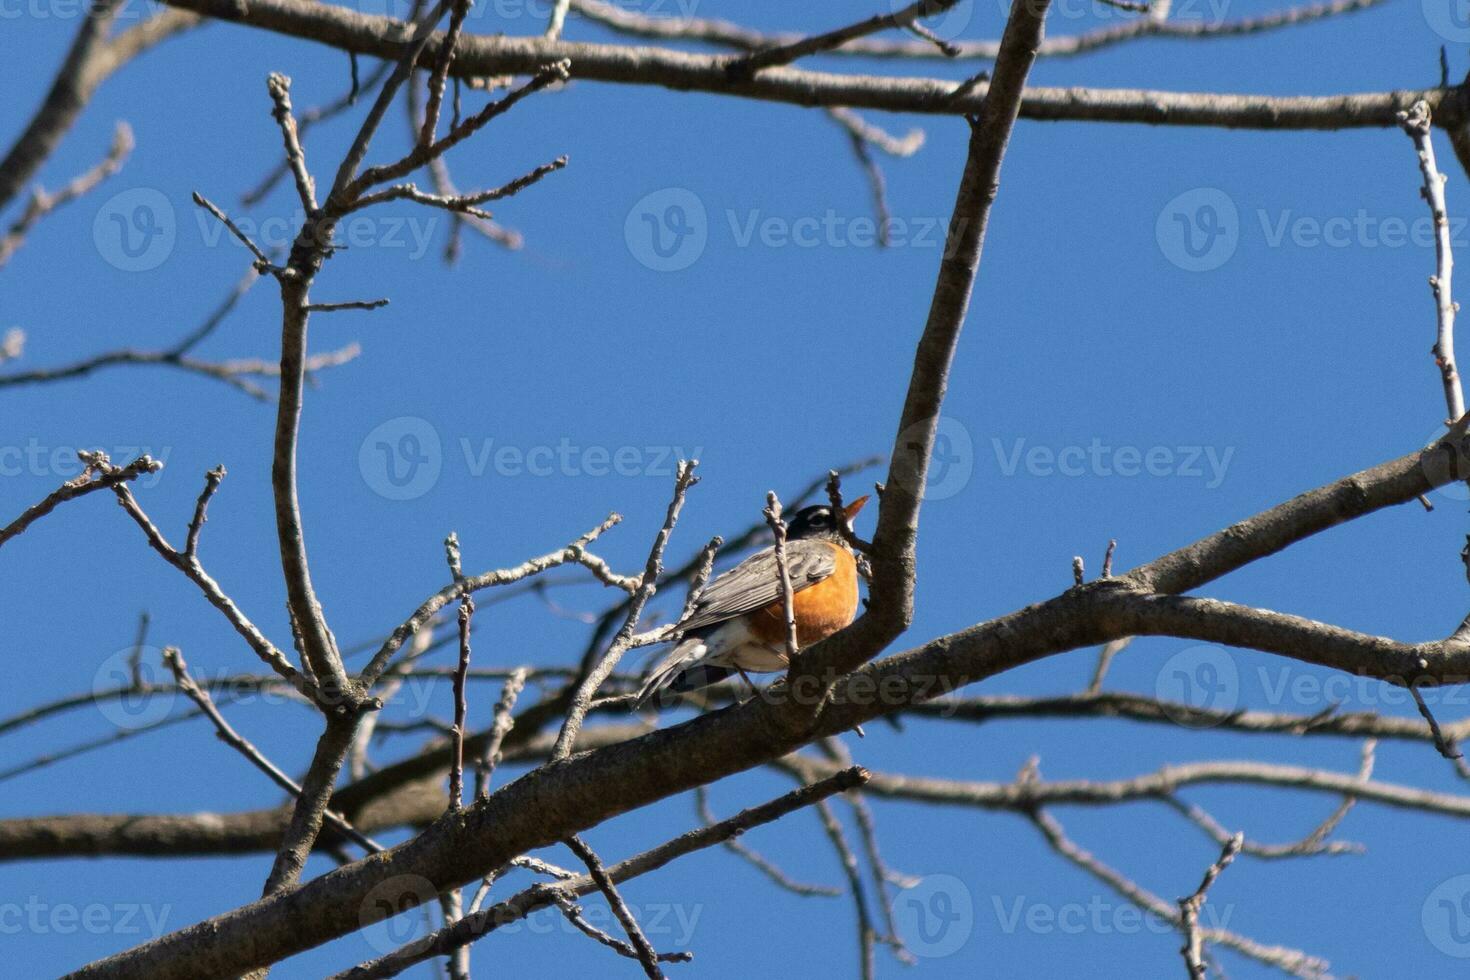 Beautiful robin perched in the tree. His black feathers blending in with the bare branches. His little orange belly stands out. The limbs of the tree do not have leaves due to the winter season. photo